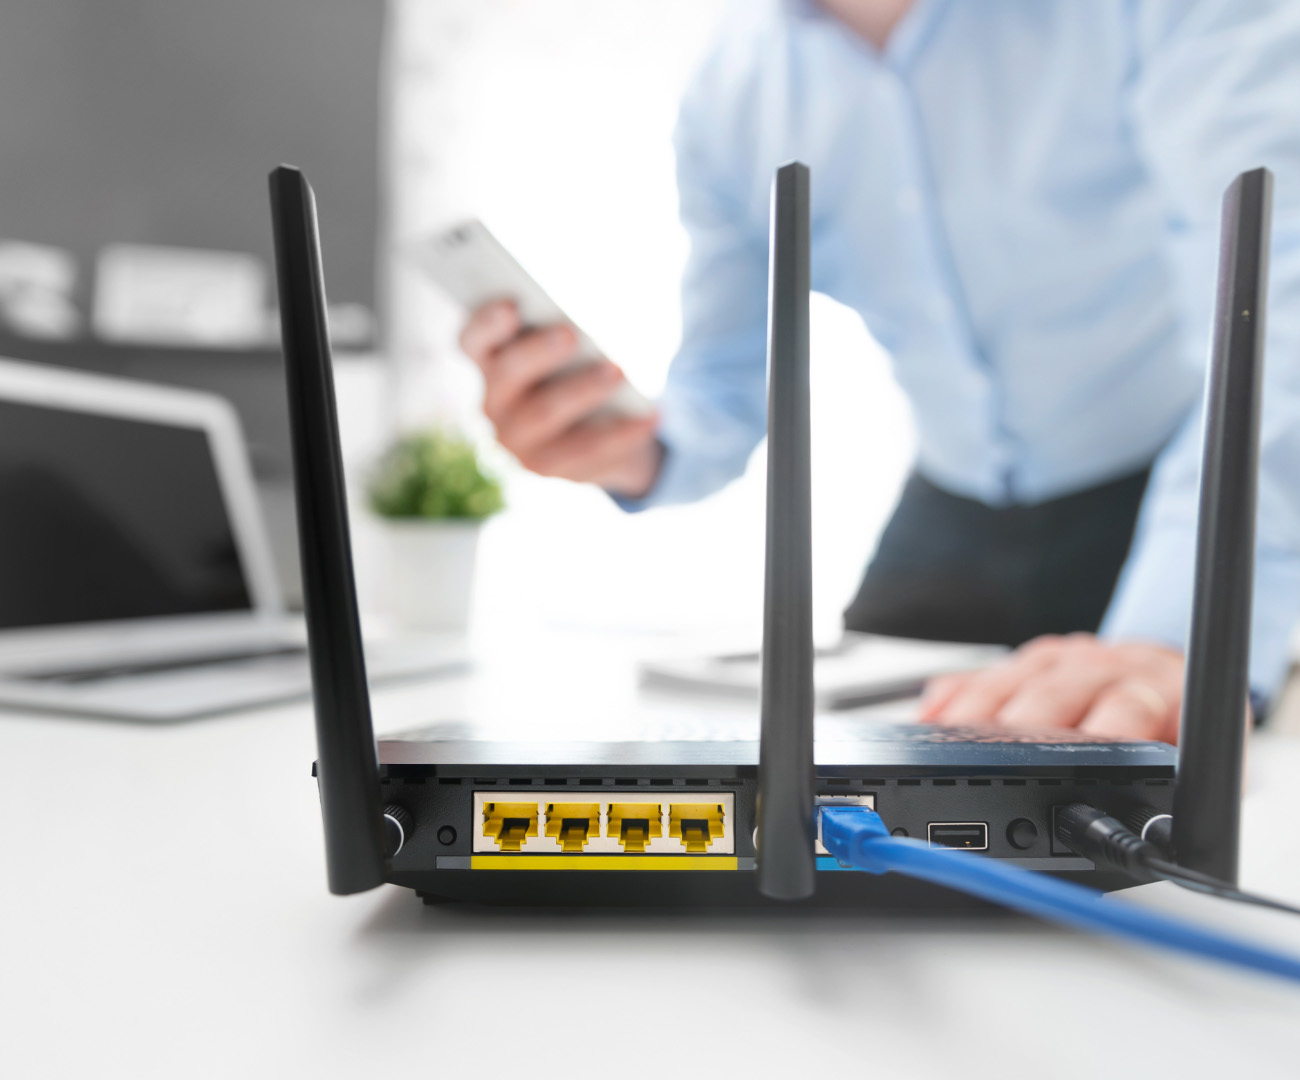 An image of an internet router